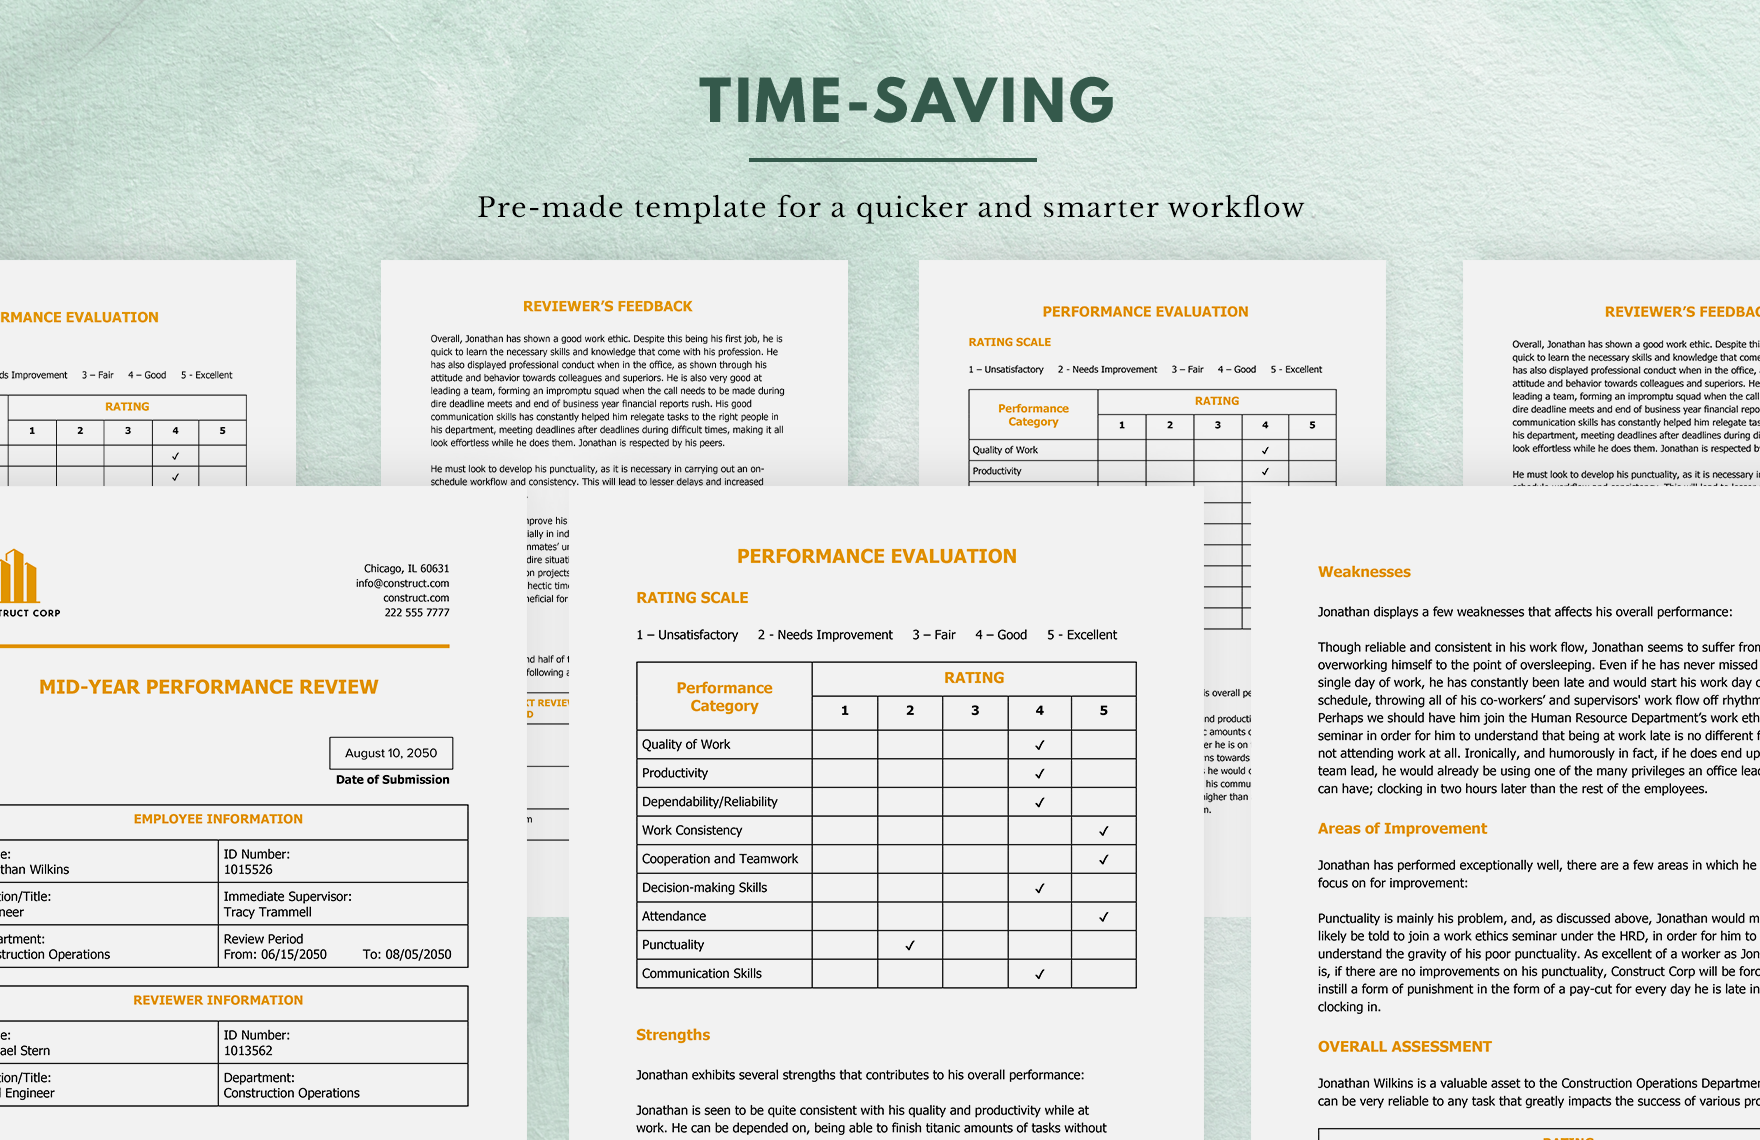 Mid-year Performance Review Template